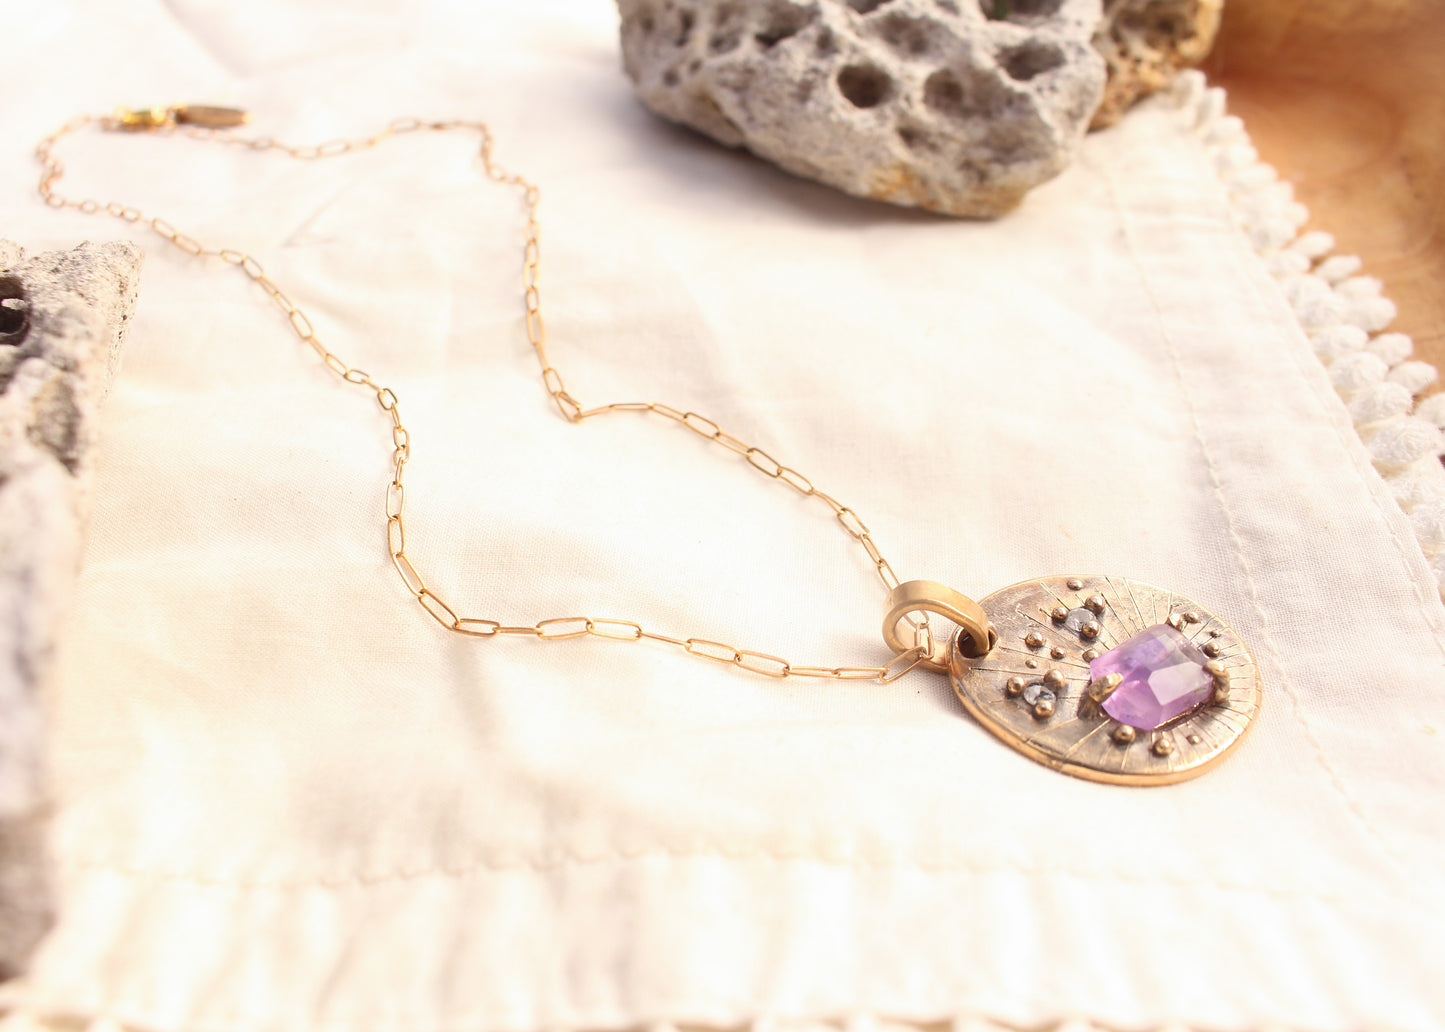 Amethyst and Topaz Star Chart necklace